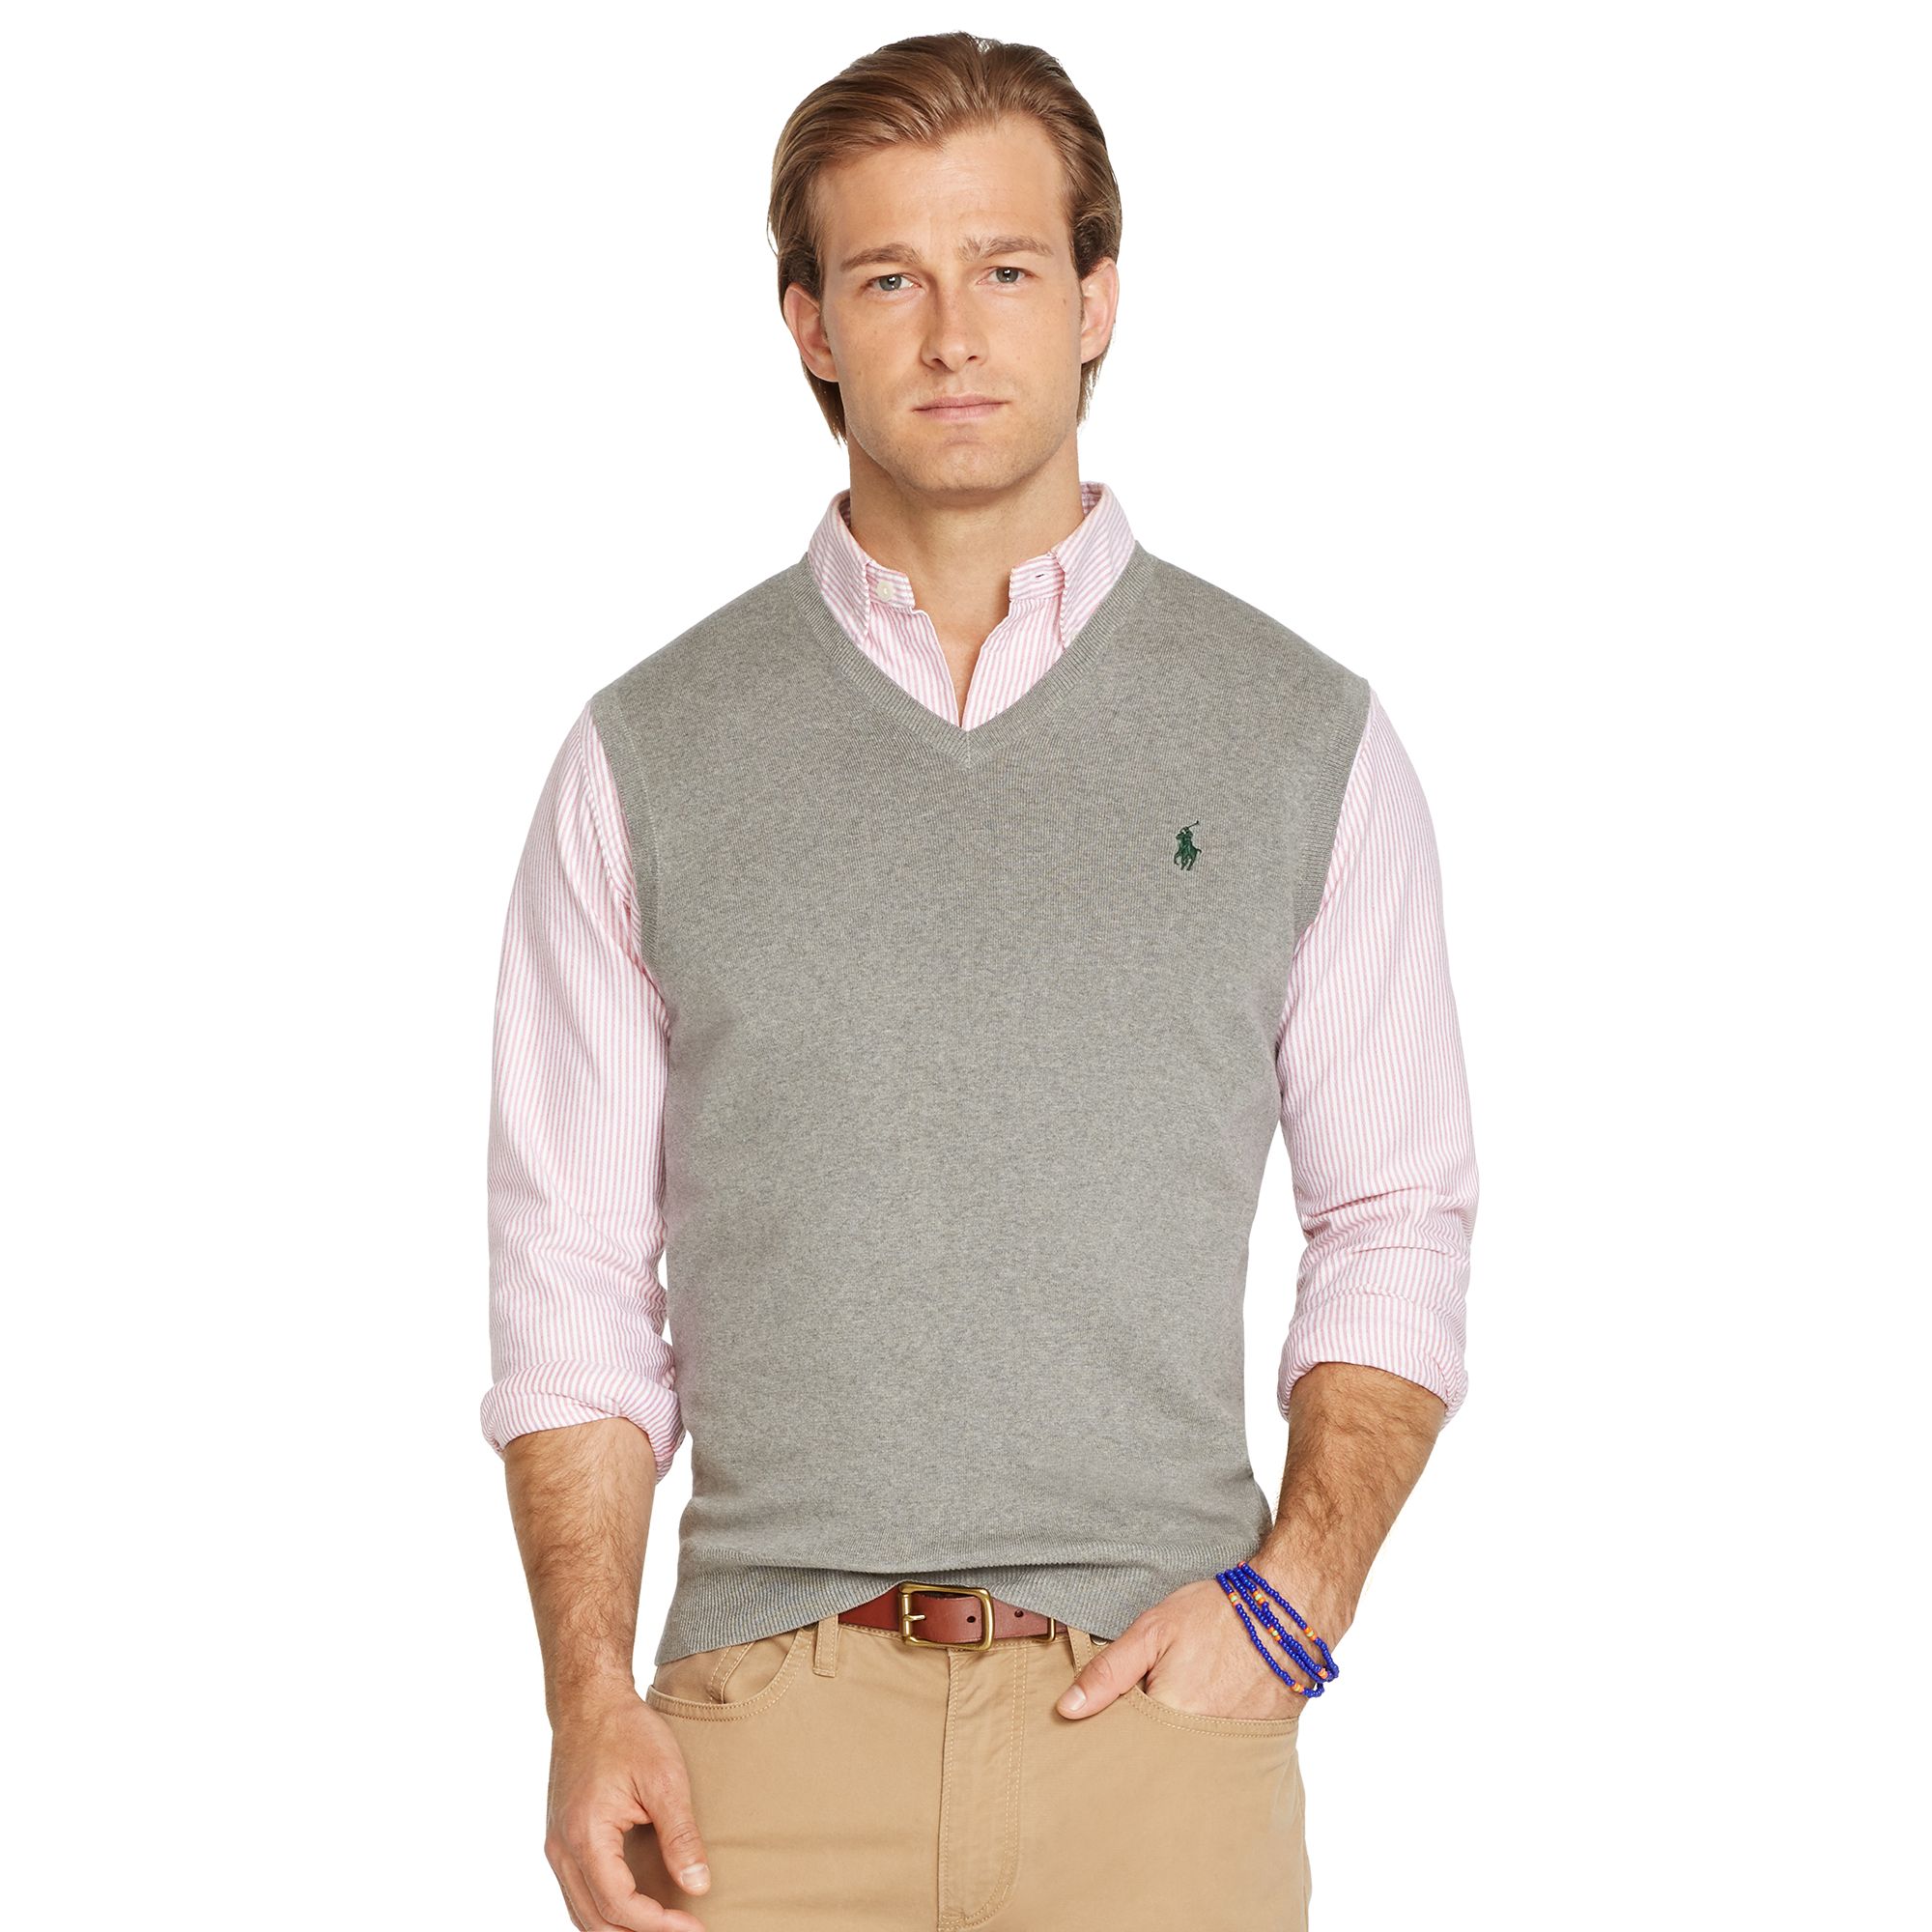 Ralph Lauren Latest Fall Winter Coats and Western Dresses Sweaters Collection for Men and Women 2014-2015 (27)